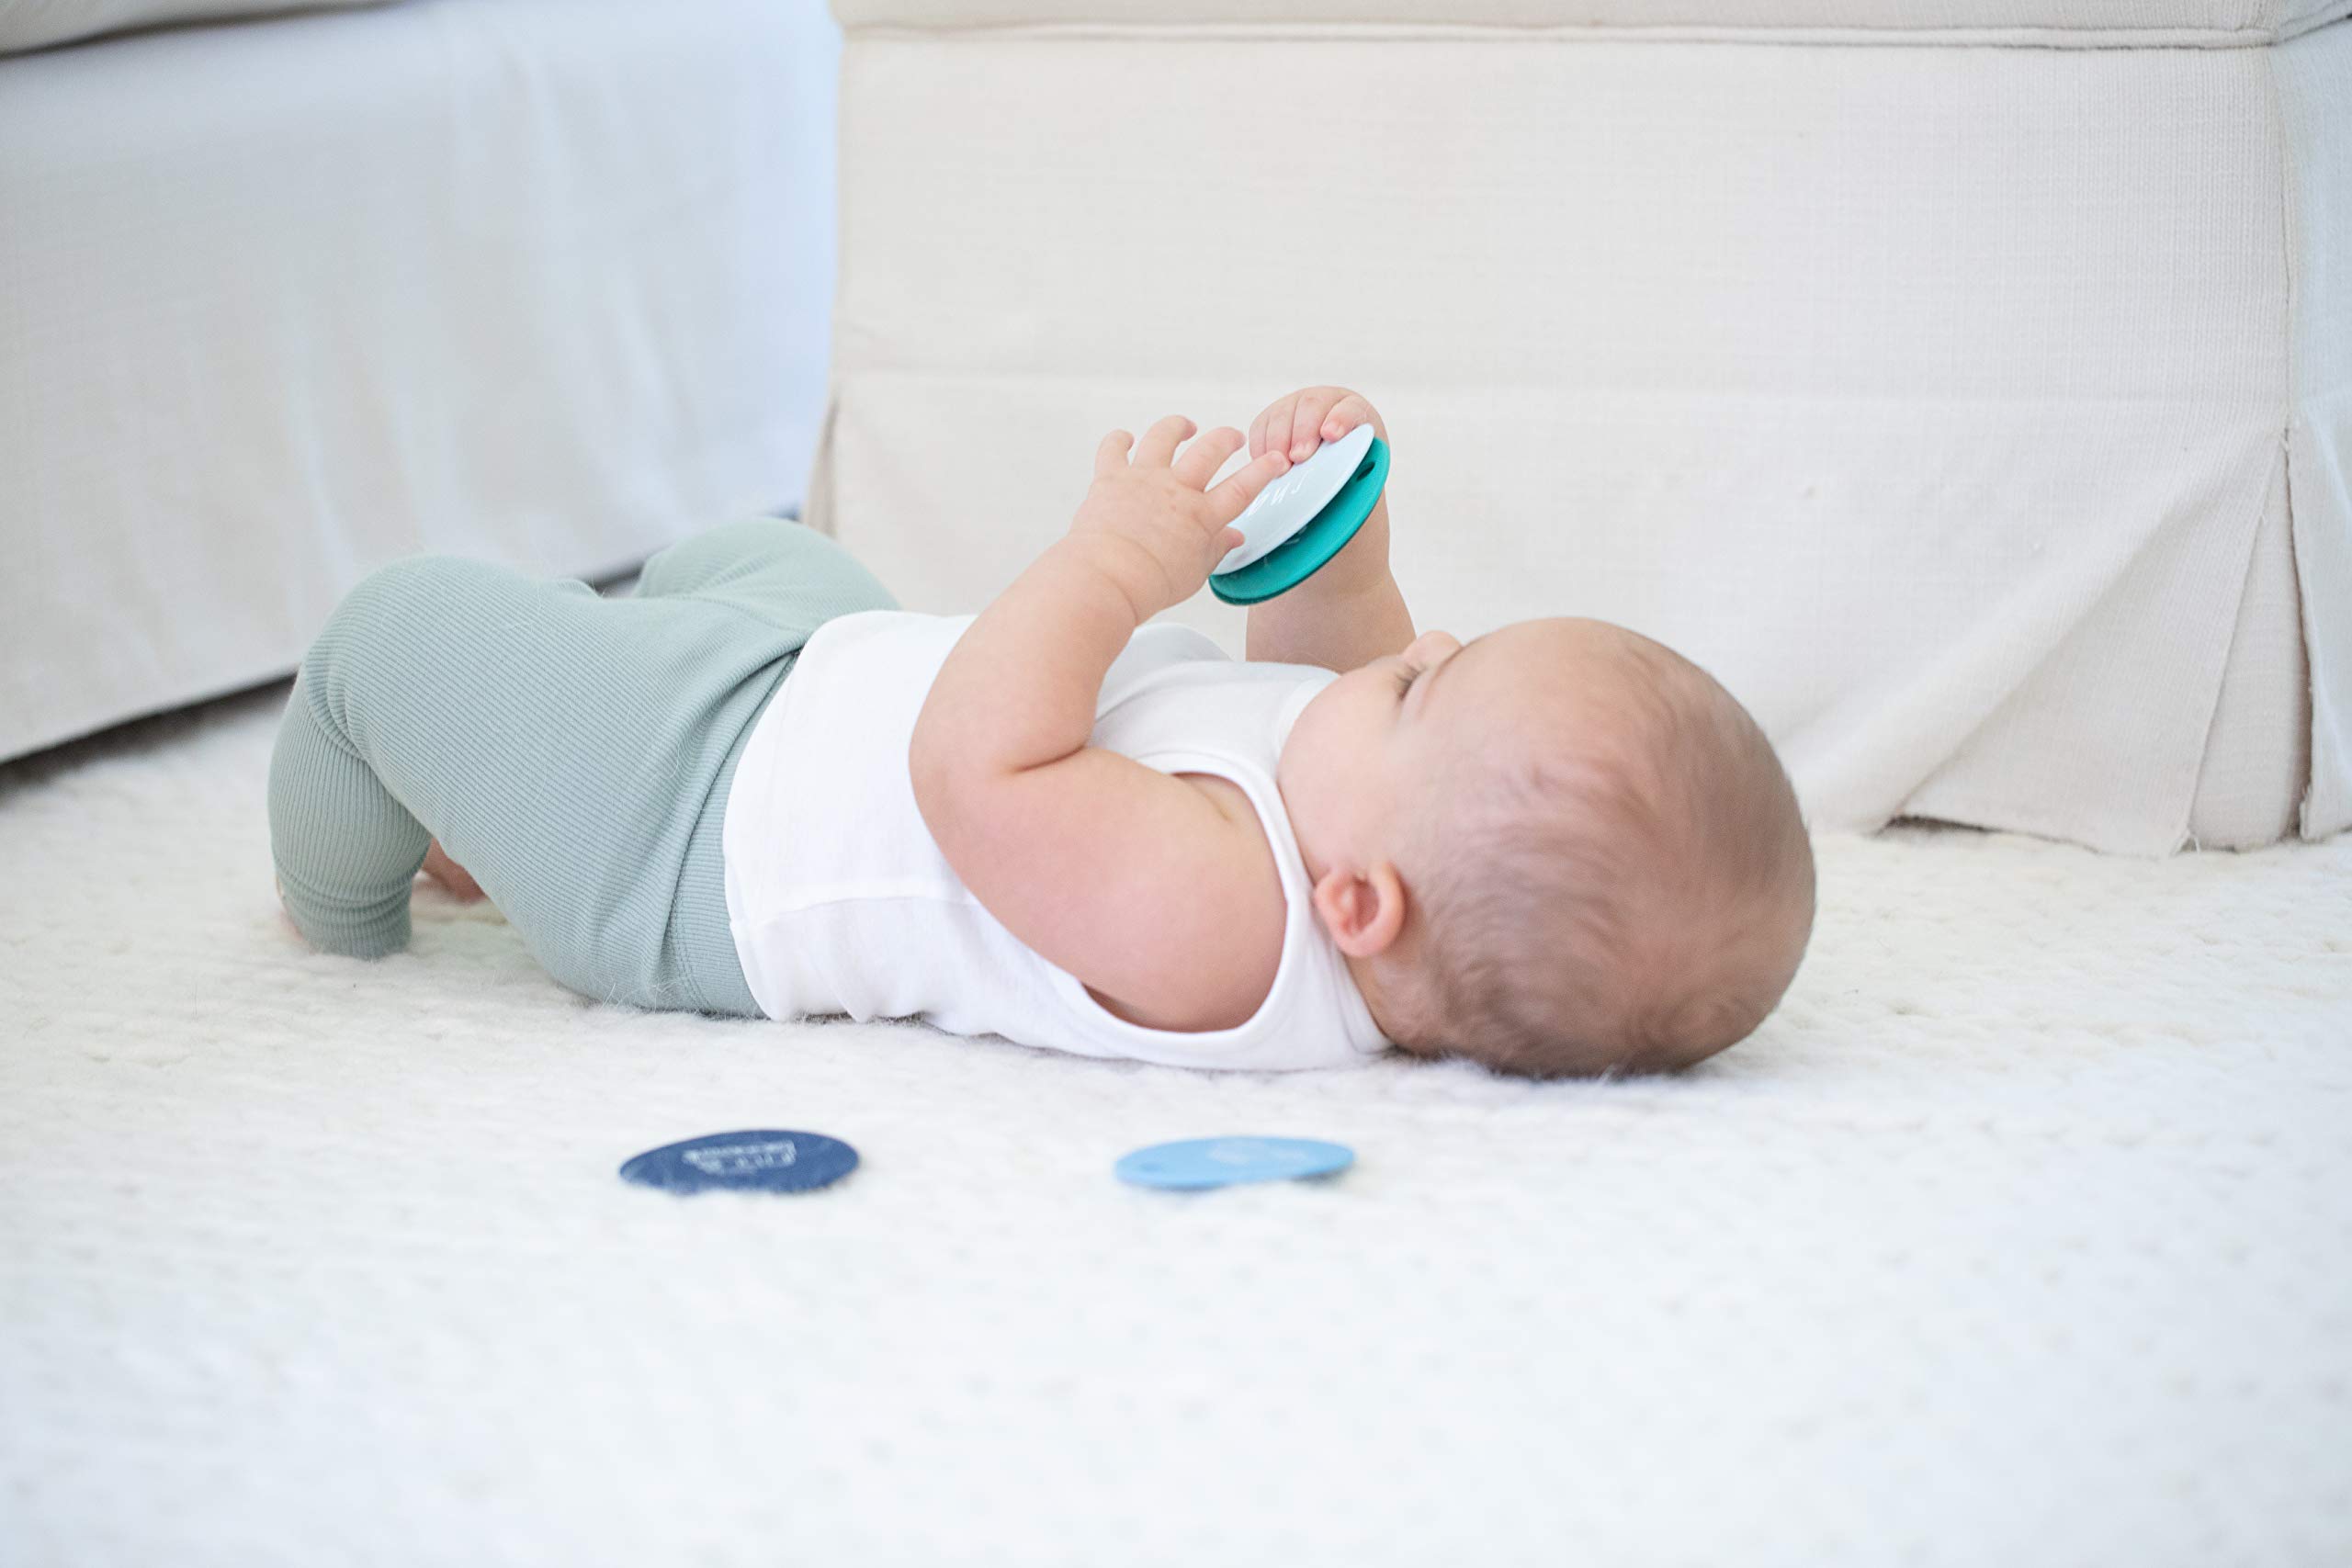 Bella Tunno Teething Flashcards - Soft & Easy Grip Baby Teether and Baby Teething Toys to Help Soothe Gums & Promote Learning Non-Toxic, BPA Free Silicone Teether, Born to Ride